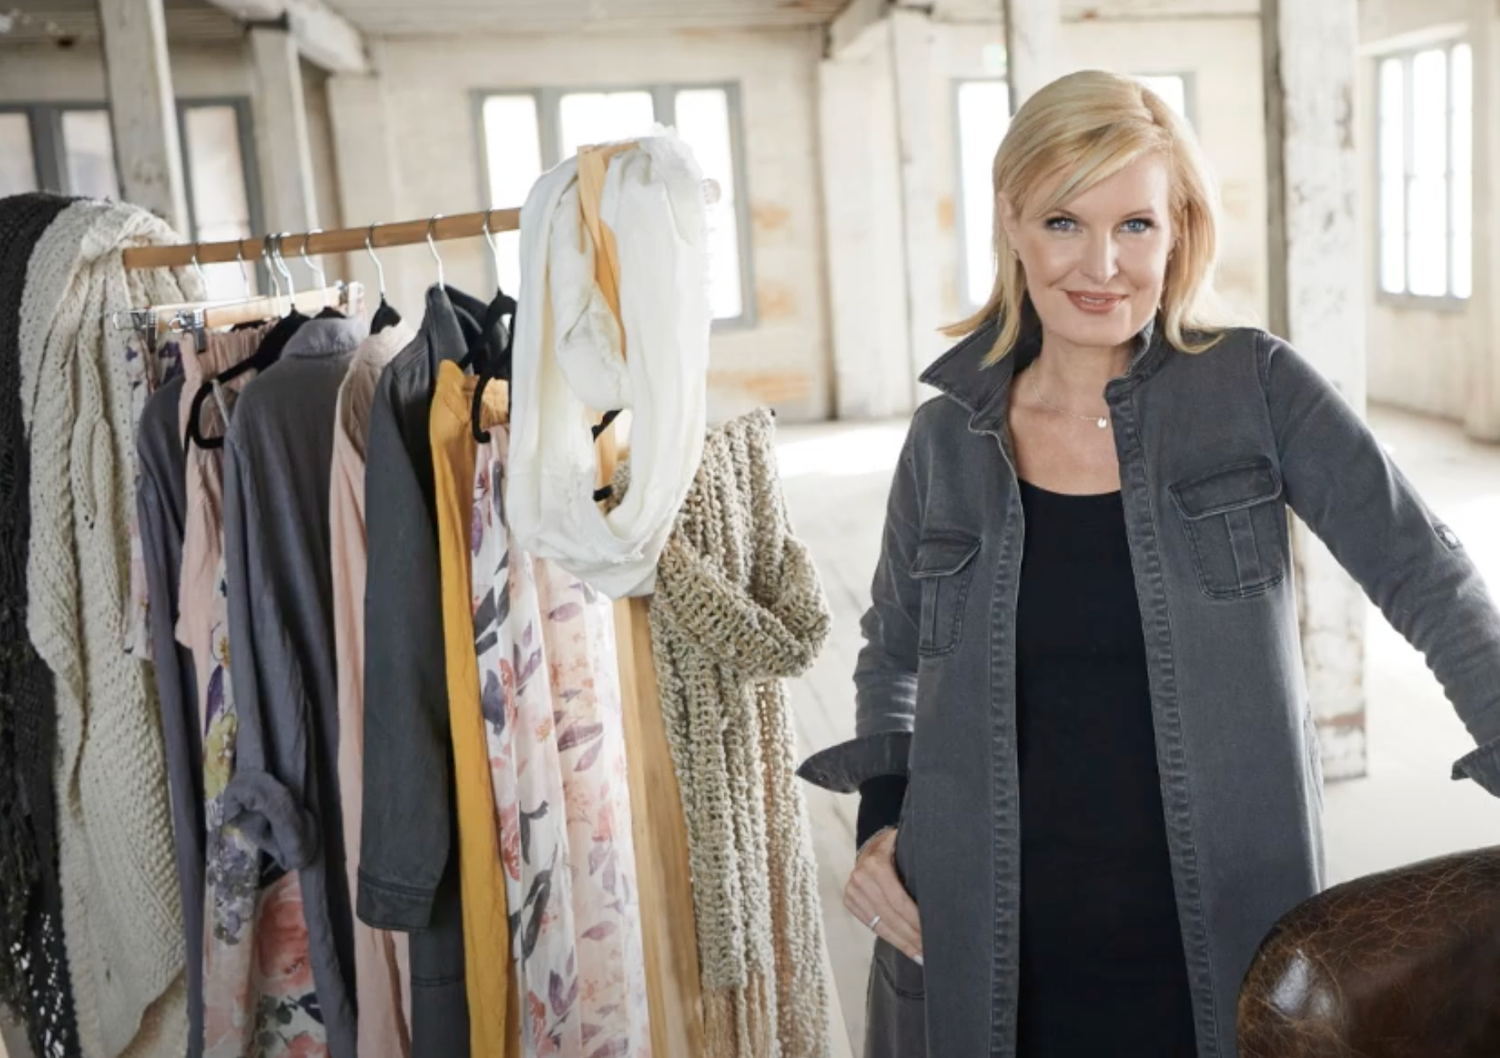 Load video: Video with Trudie Cox, founder of Eadie, giving advice on styling Eadie products clothing.